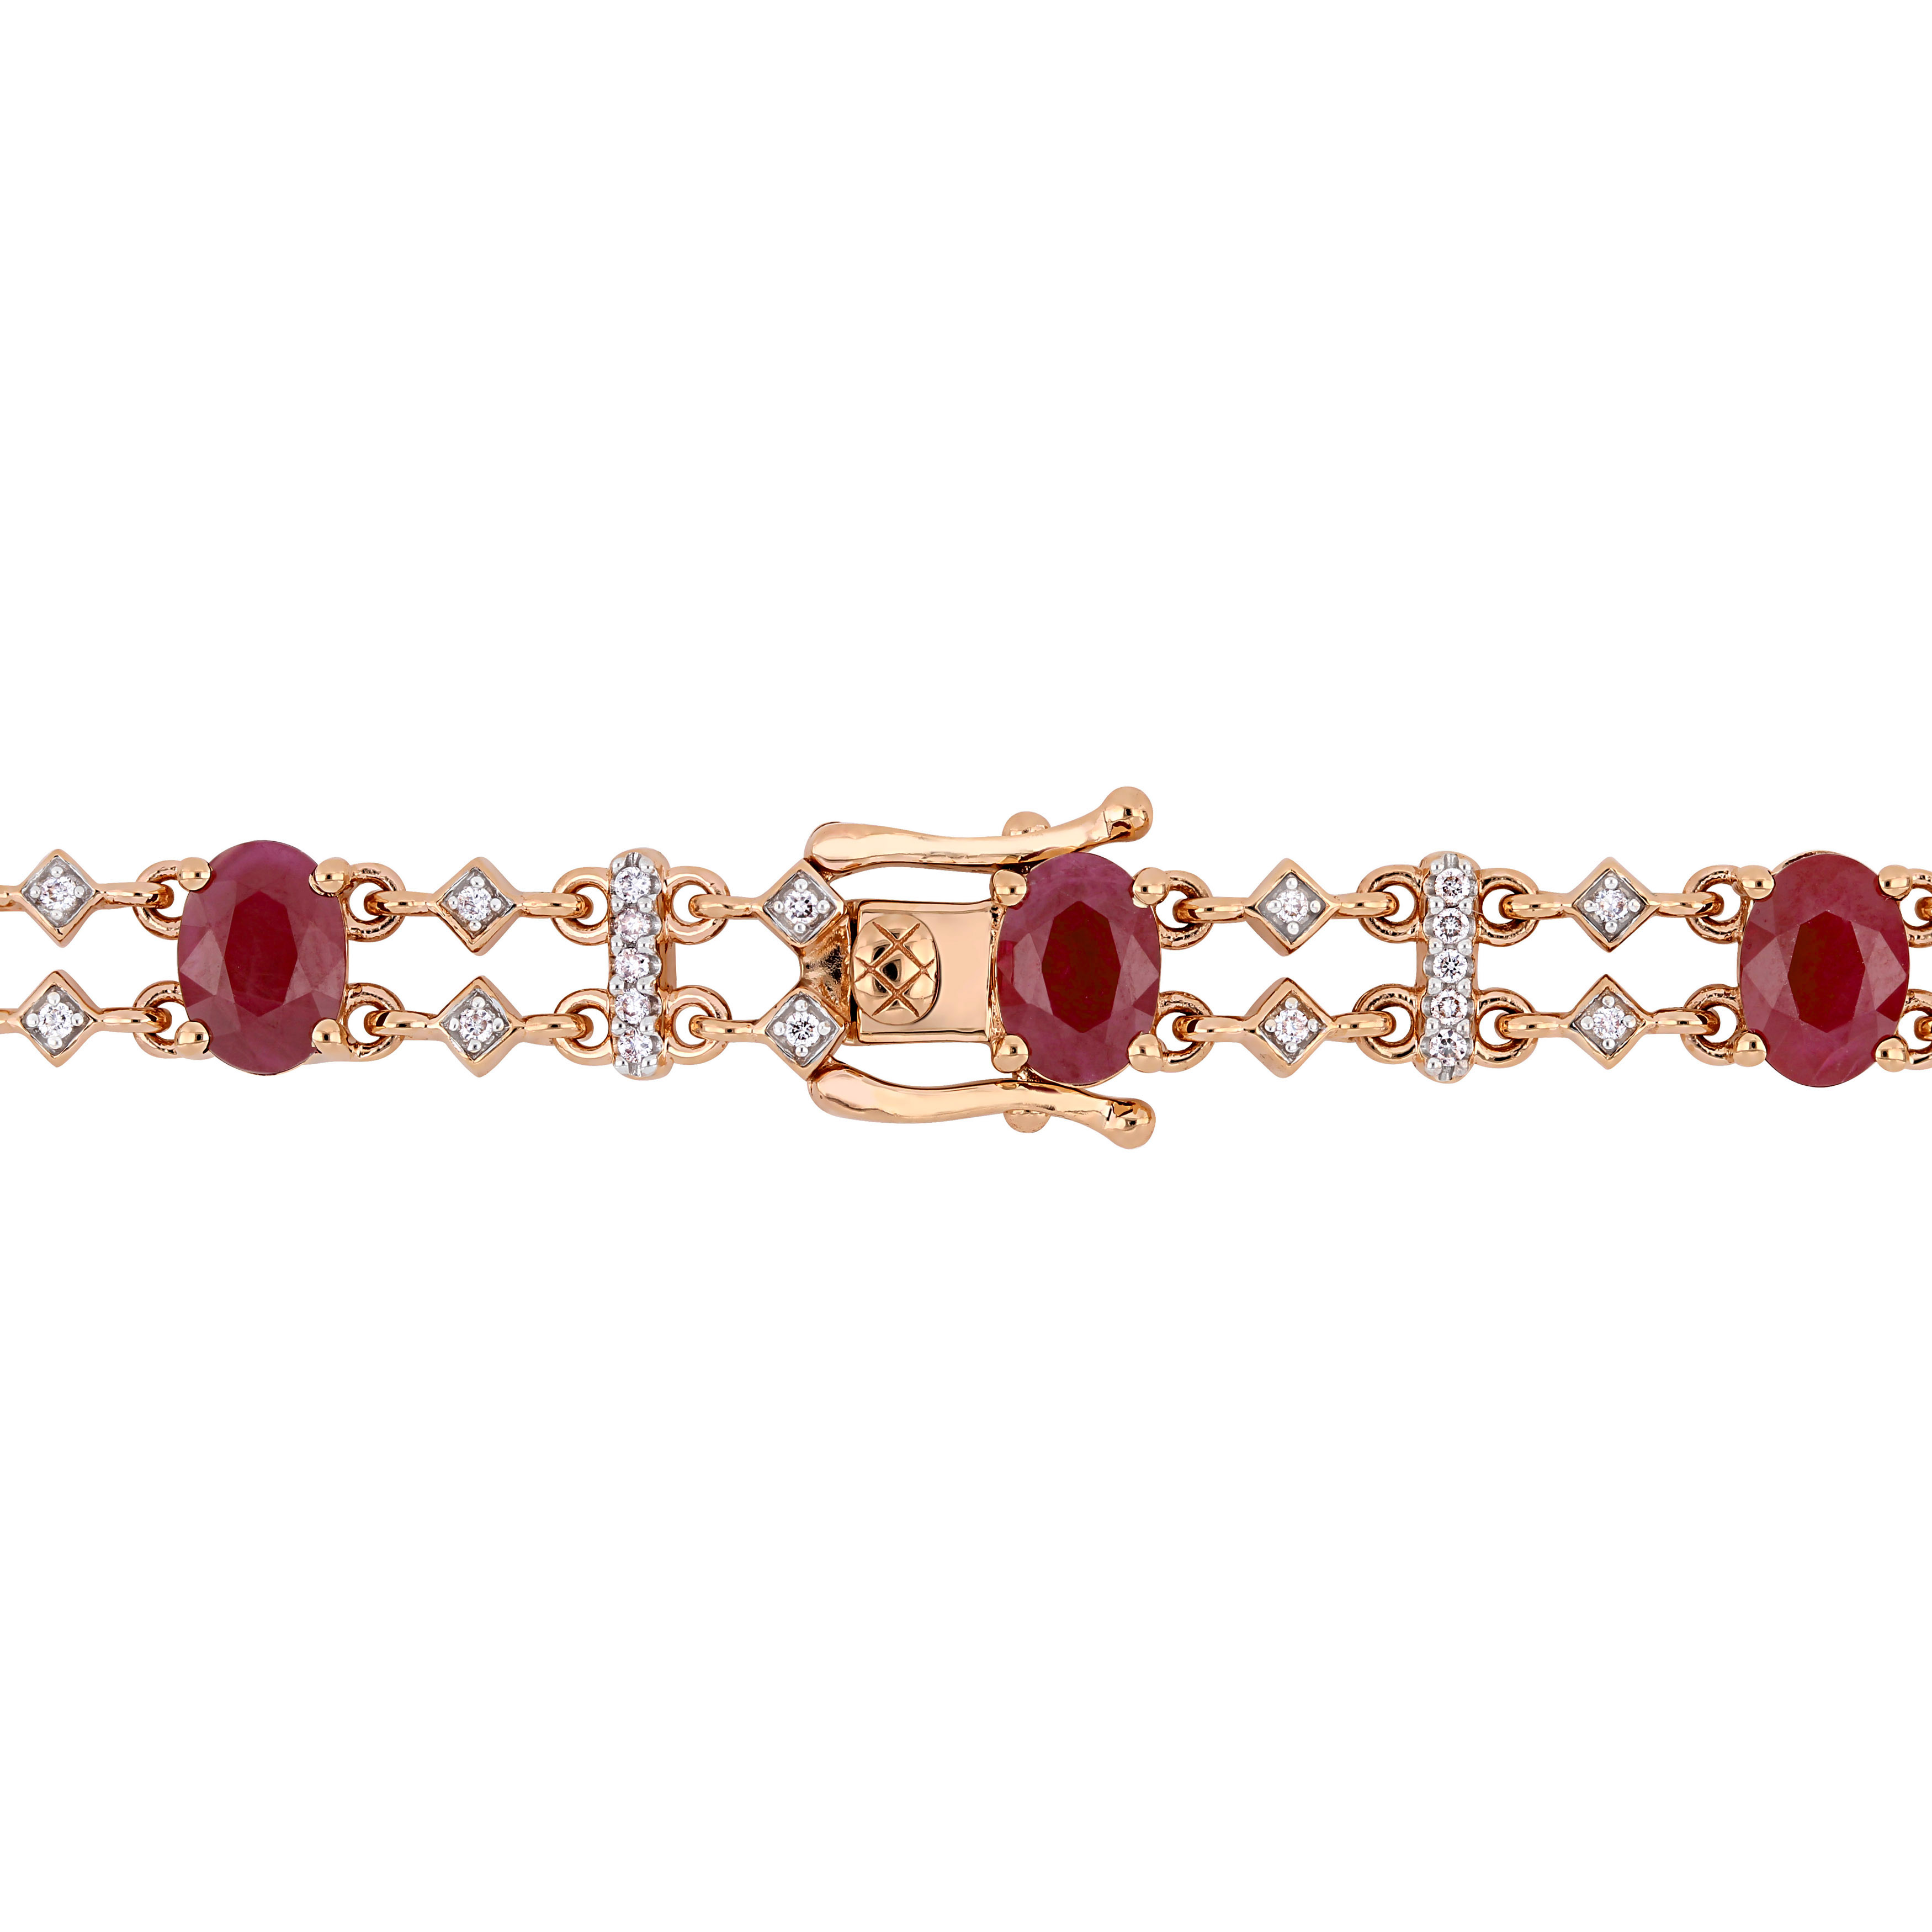 8 3/8 CT TGW Ruby and 3/8 CT TW Diamond Station Bracelet in 14k Rose Gold - 7.25 in.